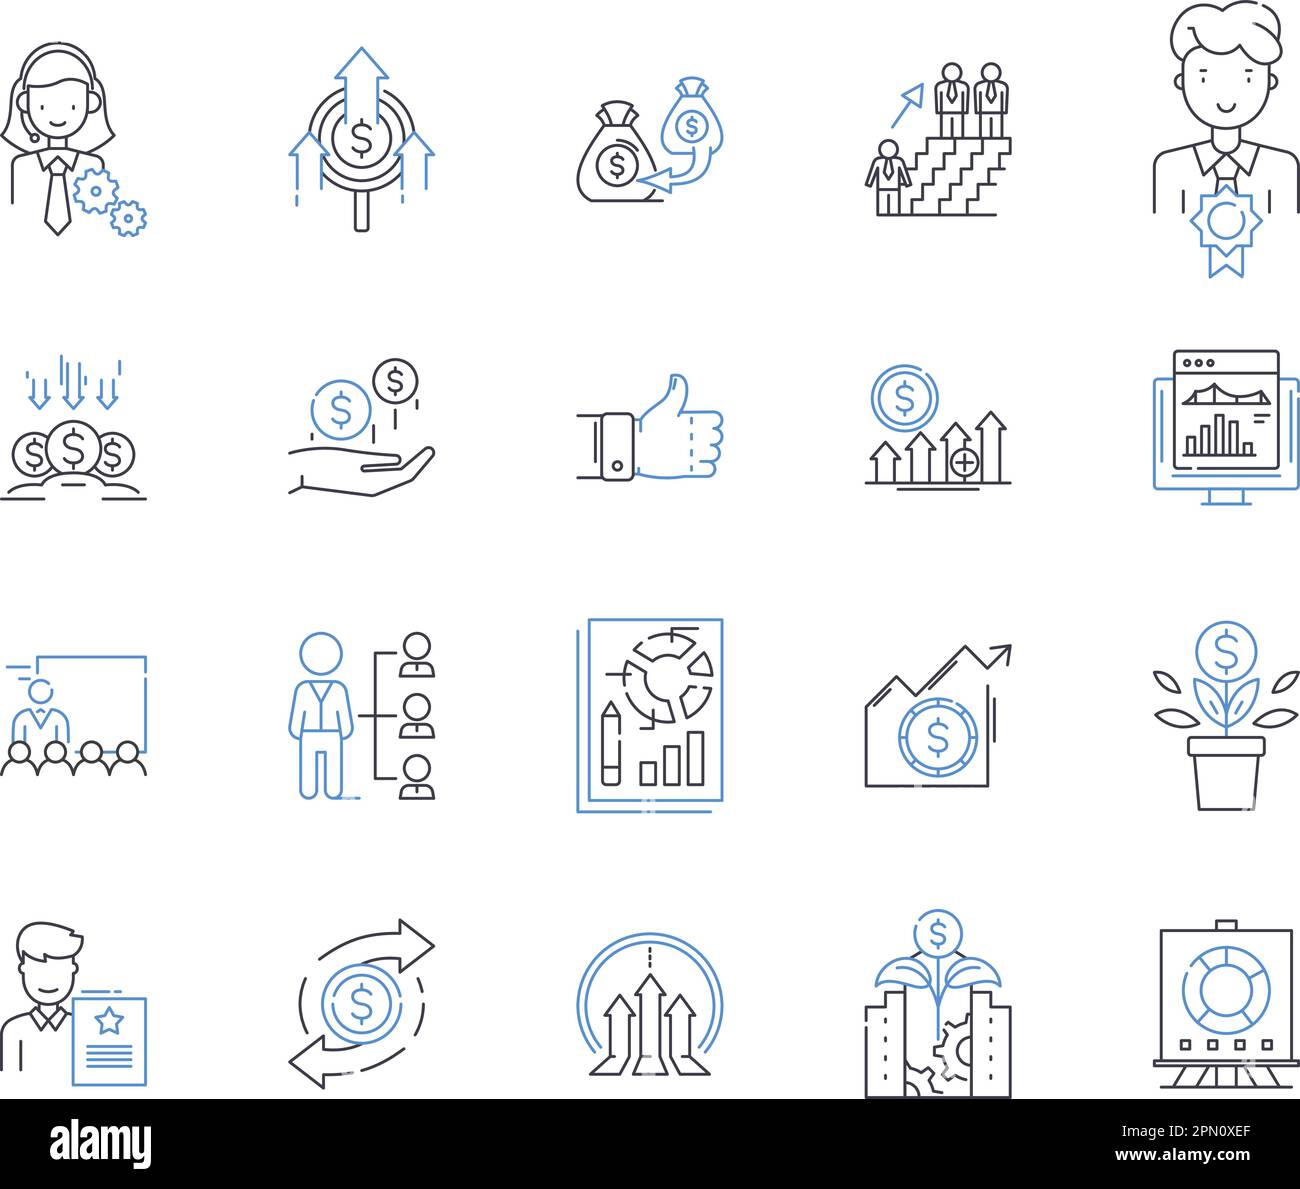 Business evaluation outline icons collection. Business, Evaluation, Rating, Analysis, Assess, Measure, Investigate vector and illustration concept set Stock Vector